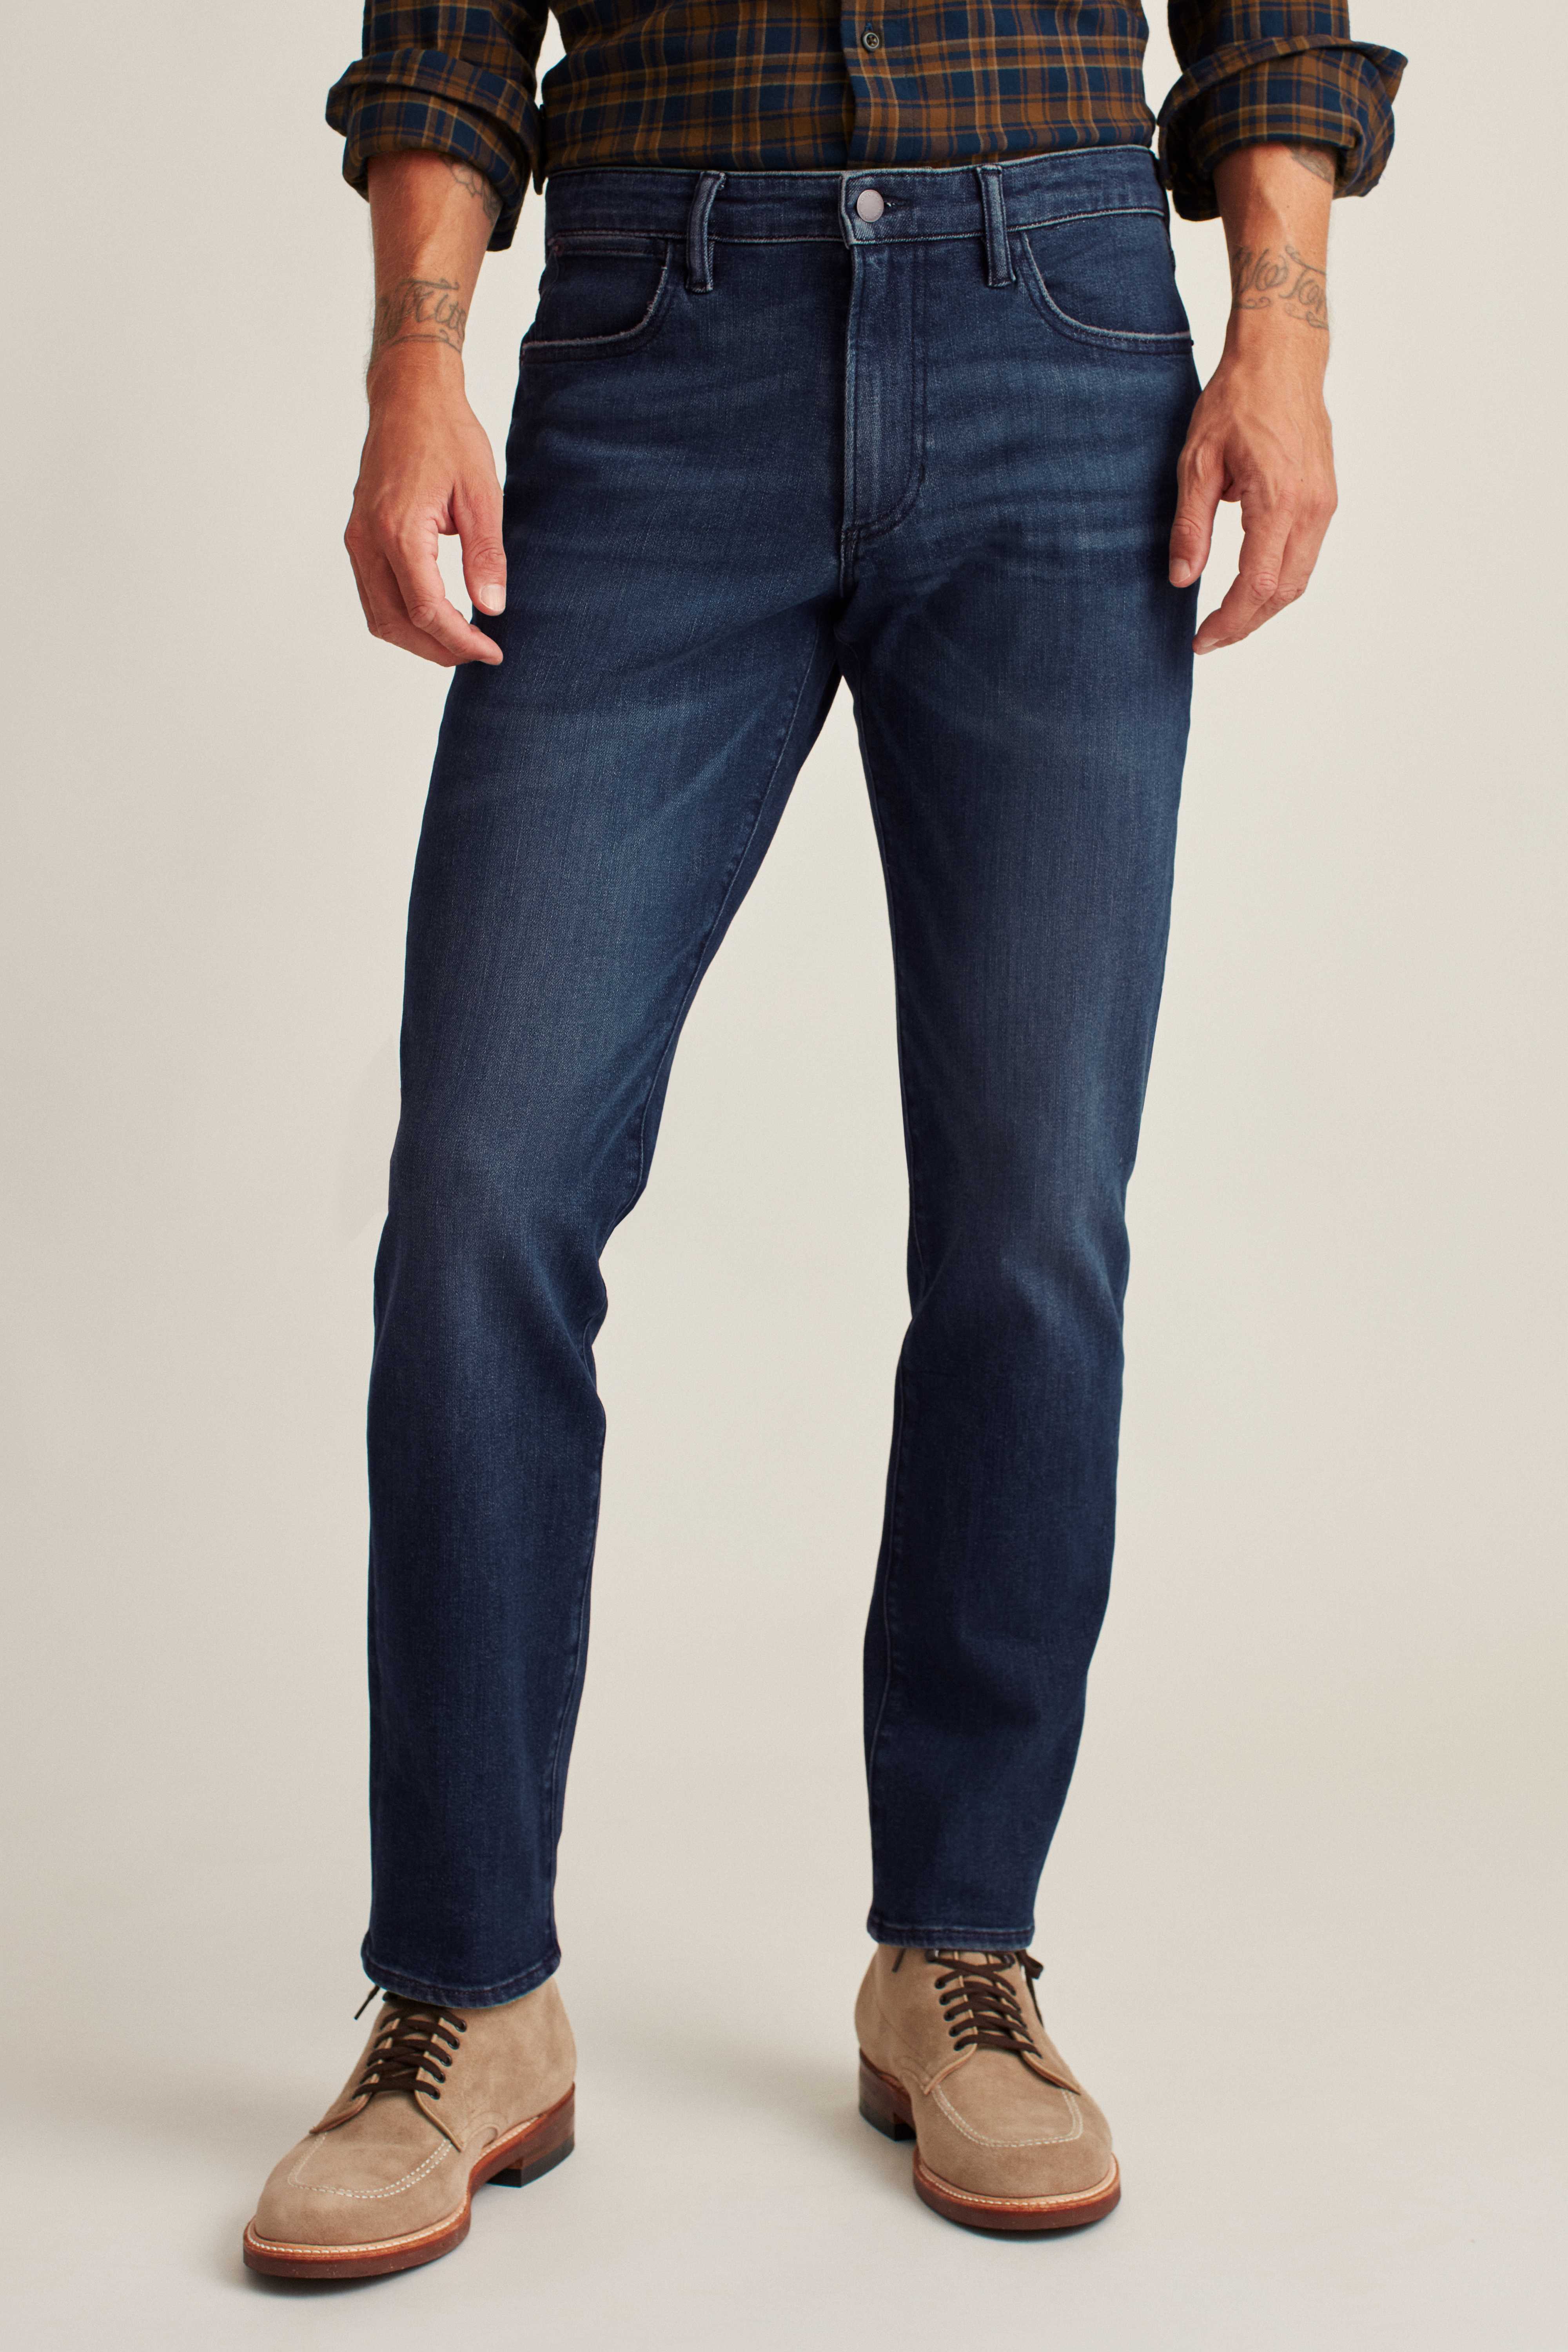 Jeans for Men - Buy Stylish Men's Jeans Online at Low prices, Low Waist  Jeans, Skinny Jeans & More